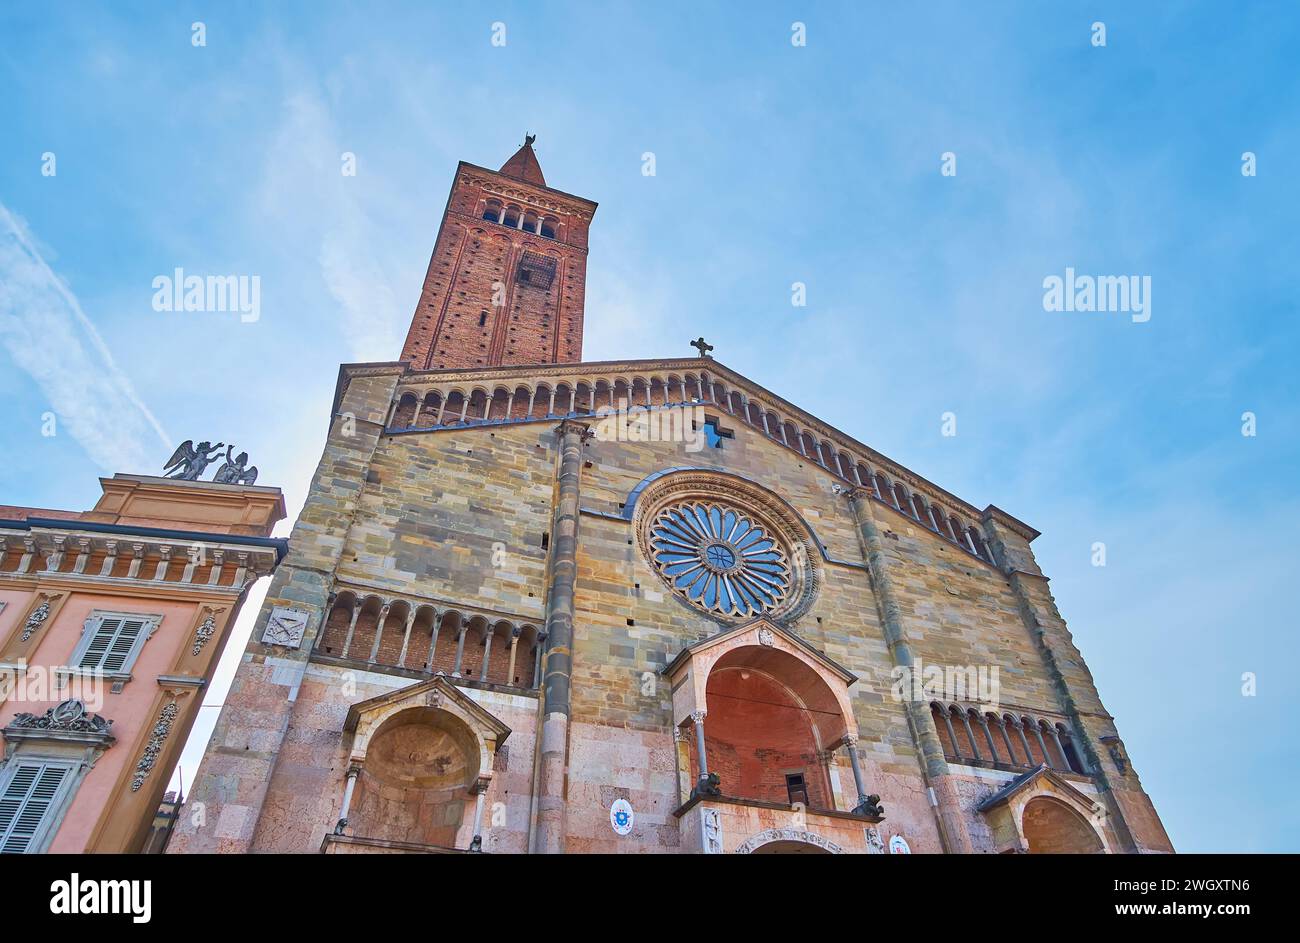 Piacenza Cathedral facade, decorated with rose window, galleries with arcades and protyruses, Italy Stock Photo